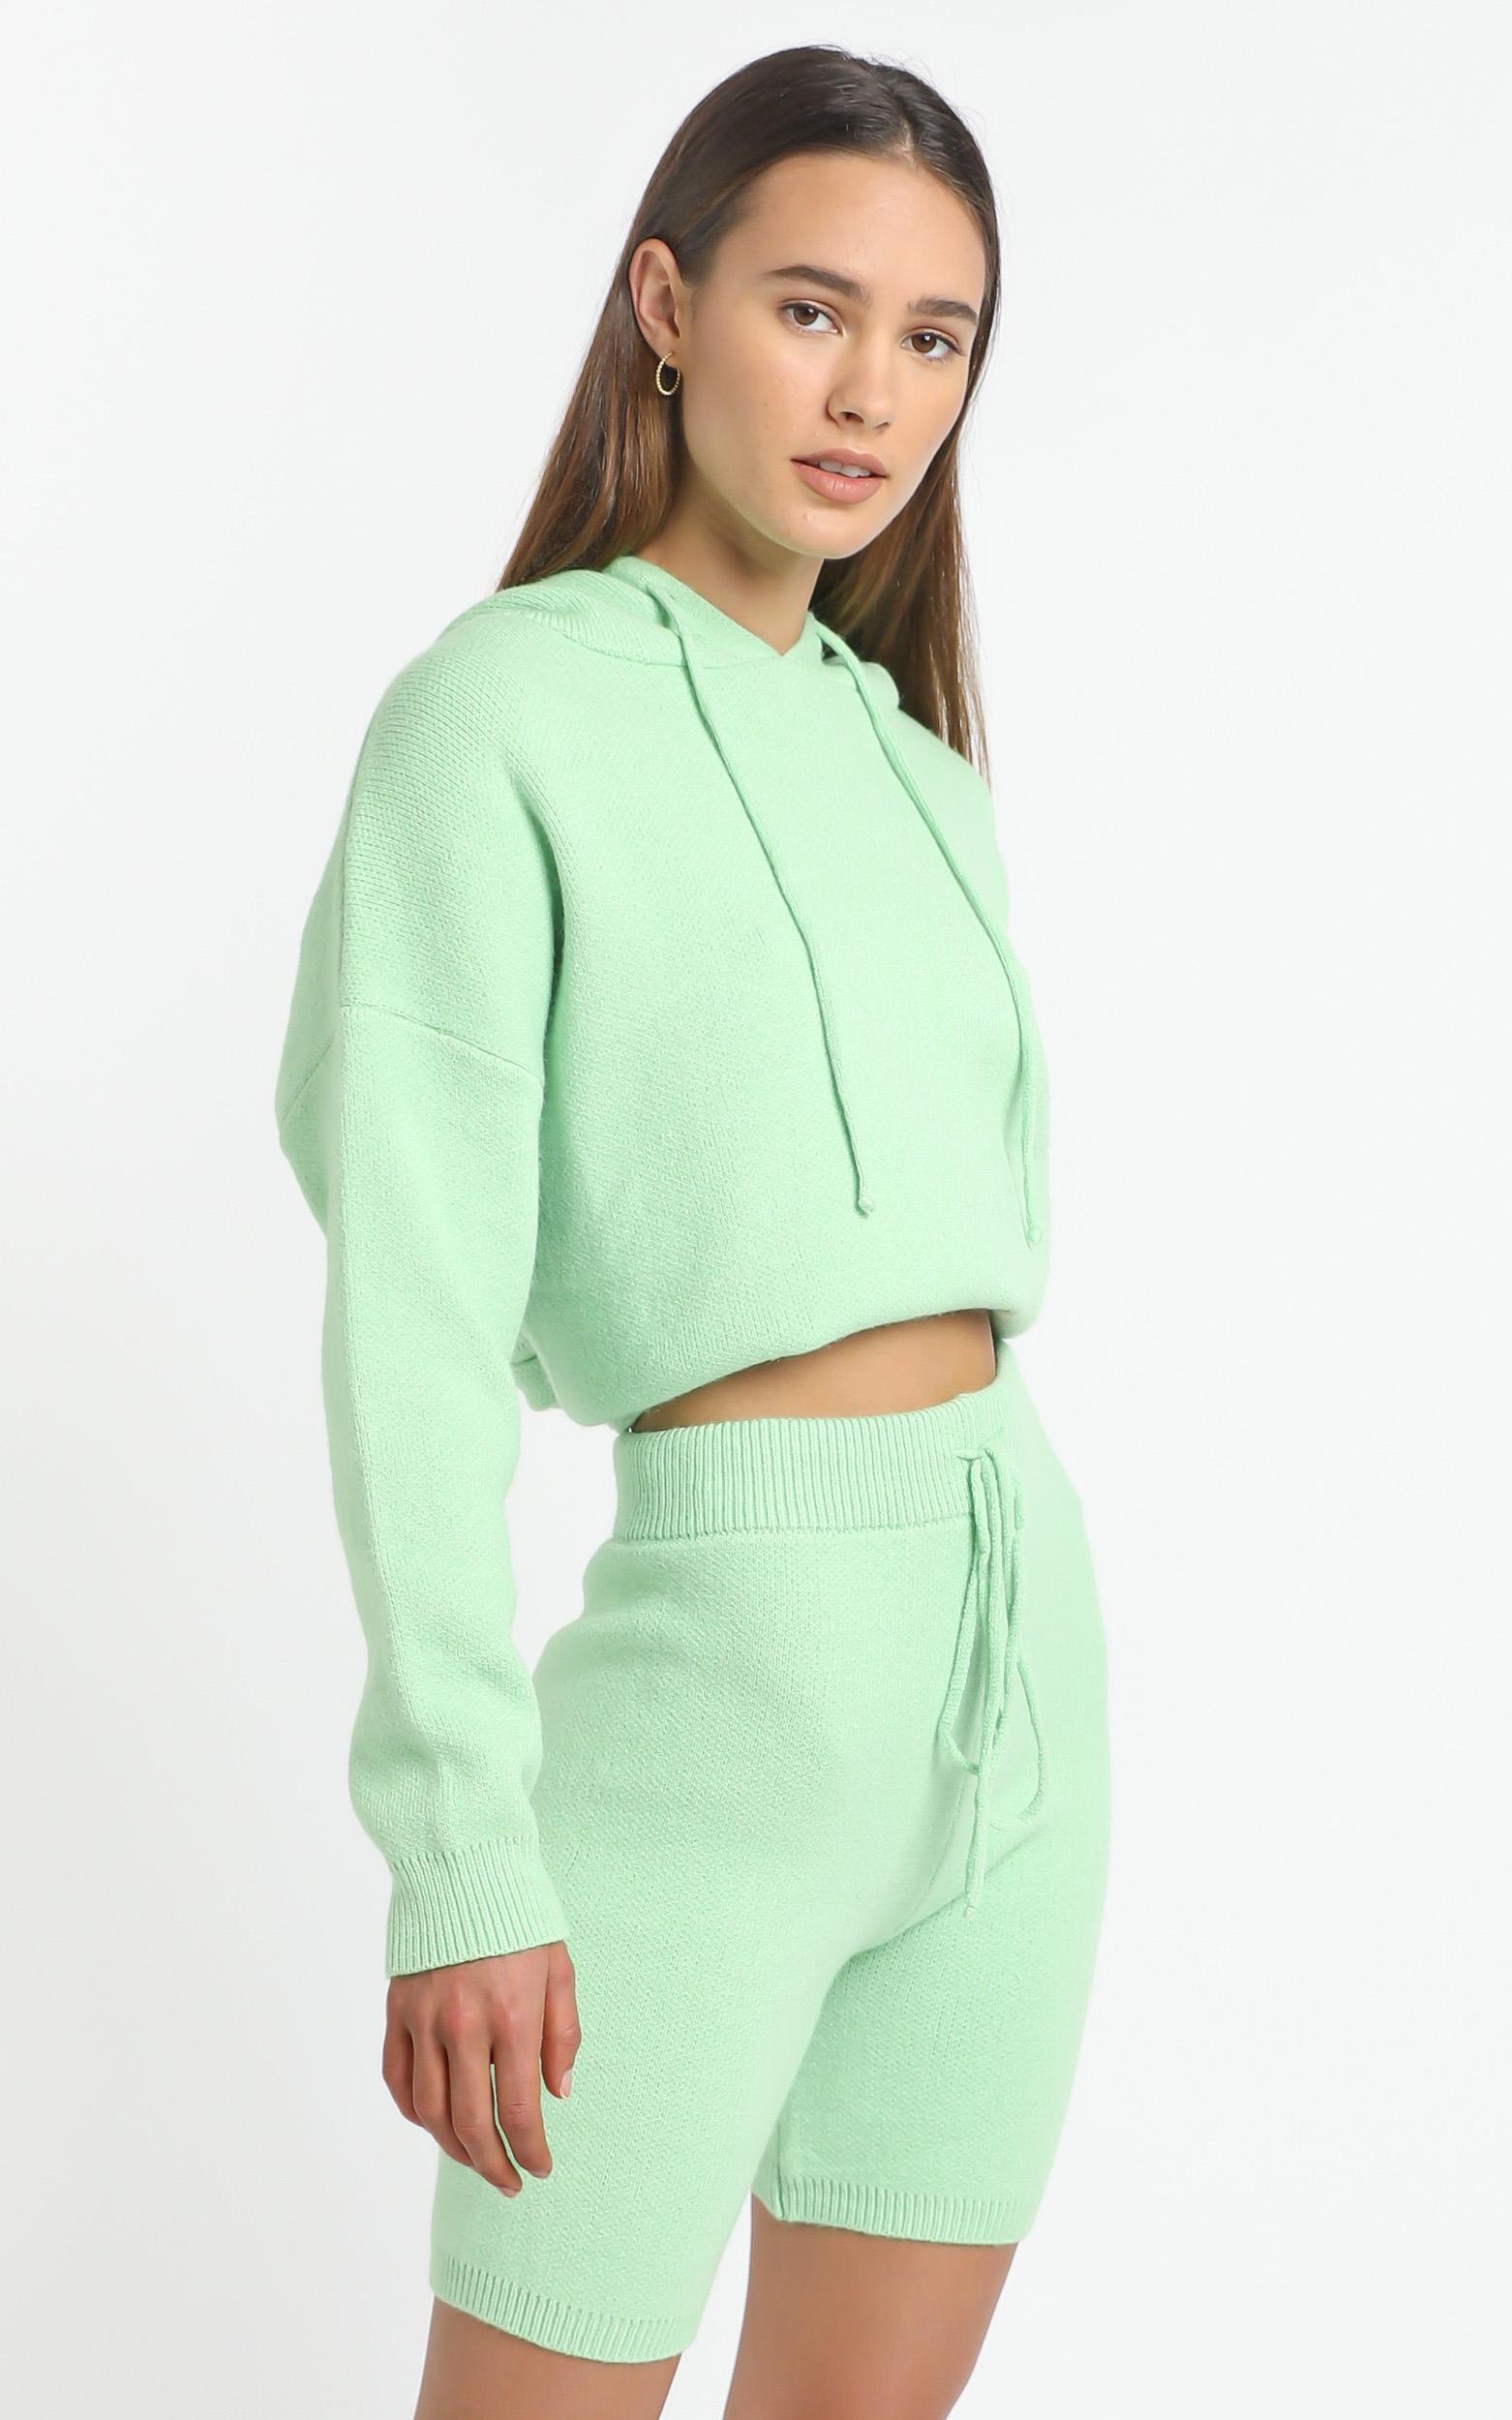 Cosy Club Knit Hoody in Mint - 8 (S), GRN1, hi-res image number null